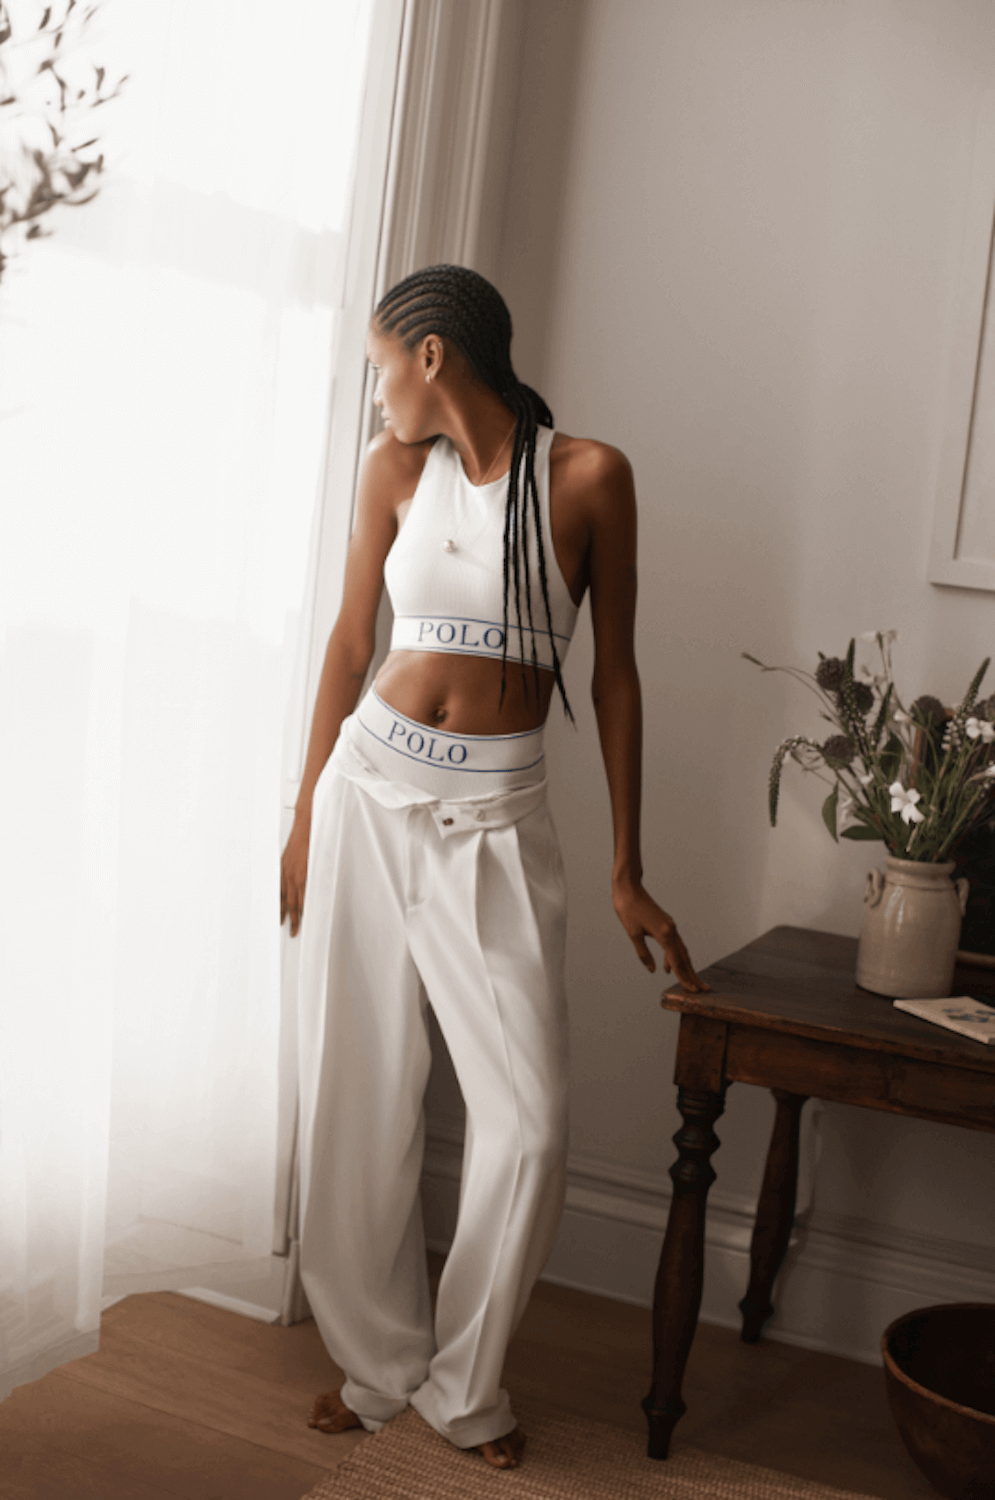 Polo Ralph Lauren Introduces Its Inaugural Line Of Women's Intimates And  Sleepwear - 10 Magazine